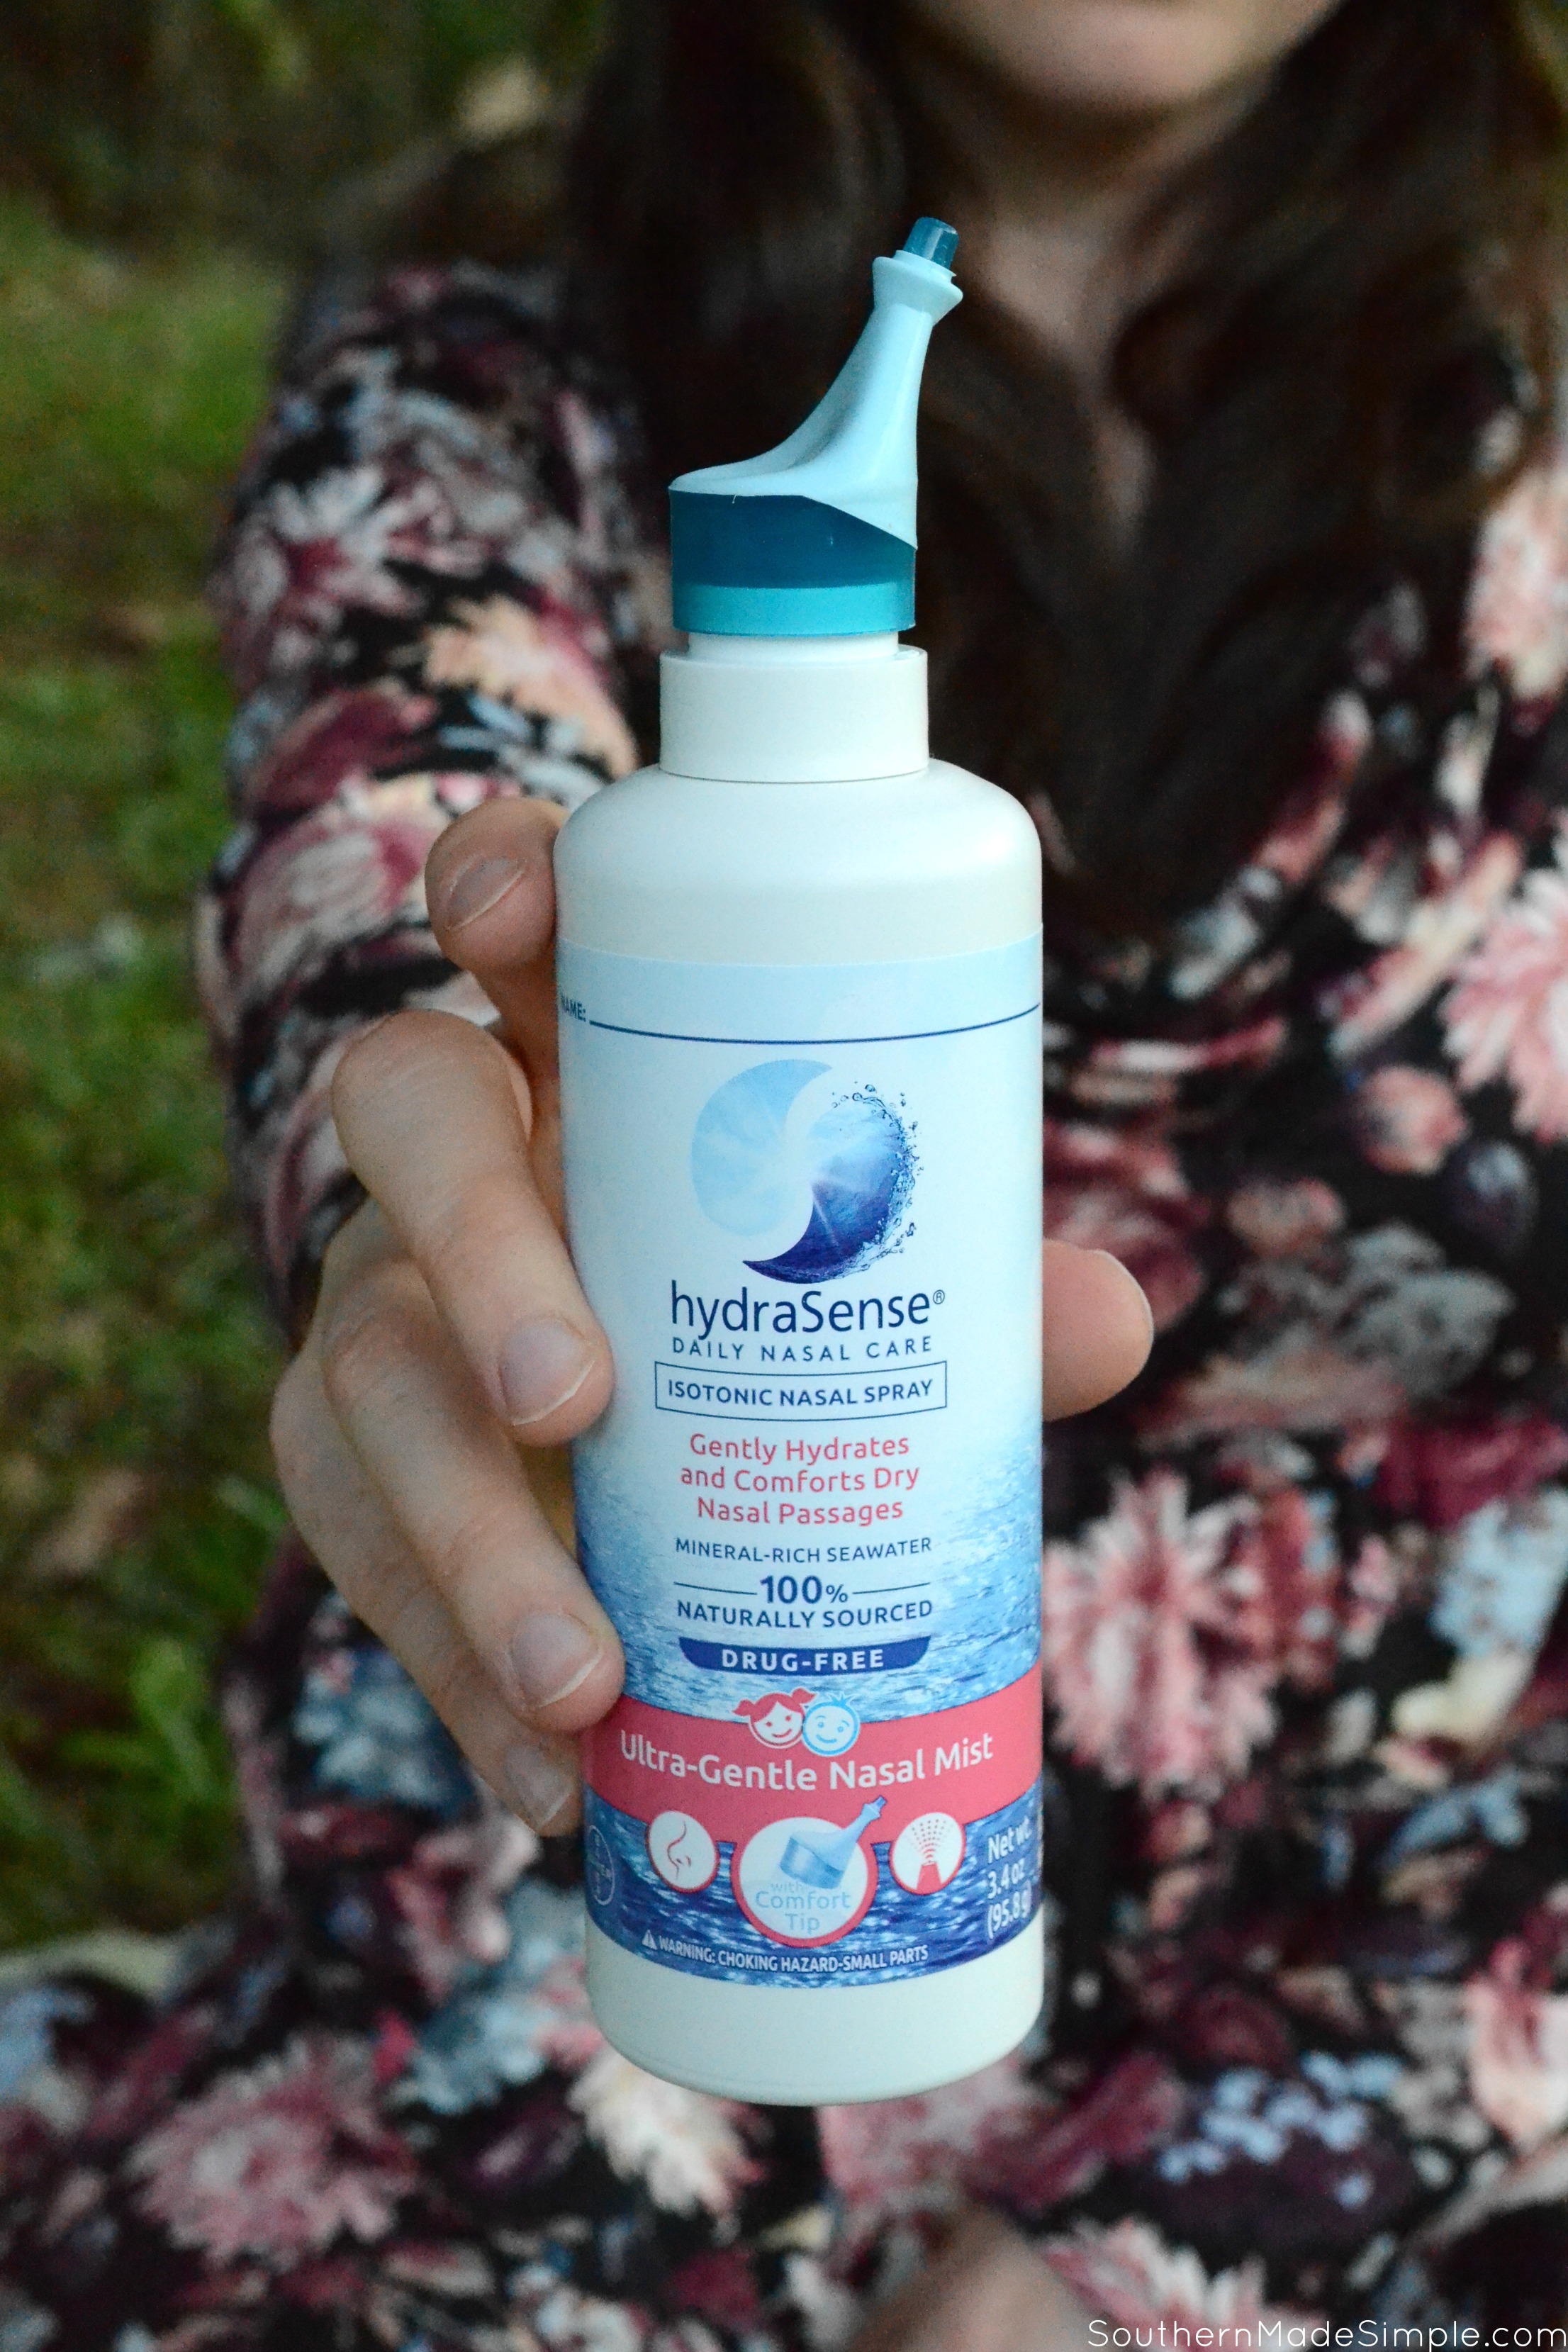 Finding natural and safe solutions for children to fight against cold and flu season are tough to come by. Thankfully, Bayer hydraSense offers a natural, drug free solution to help take care of children's nasal care needs! #hydraSense #IC #ad